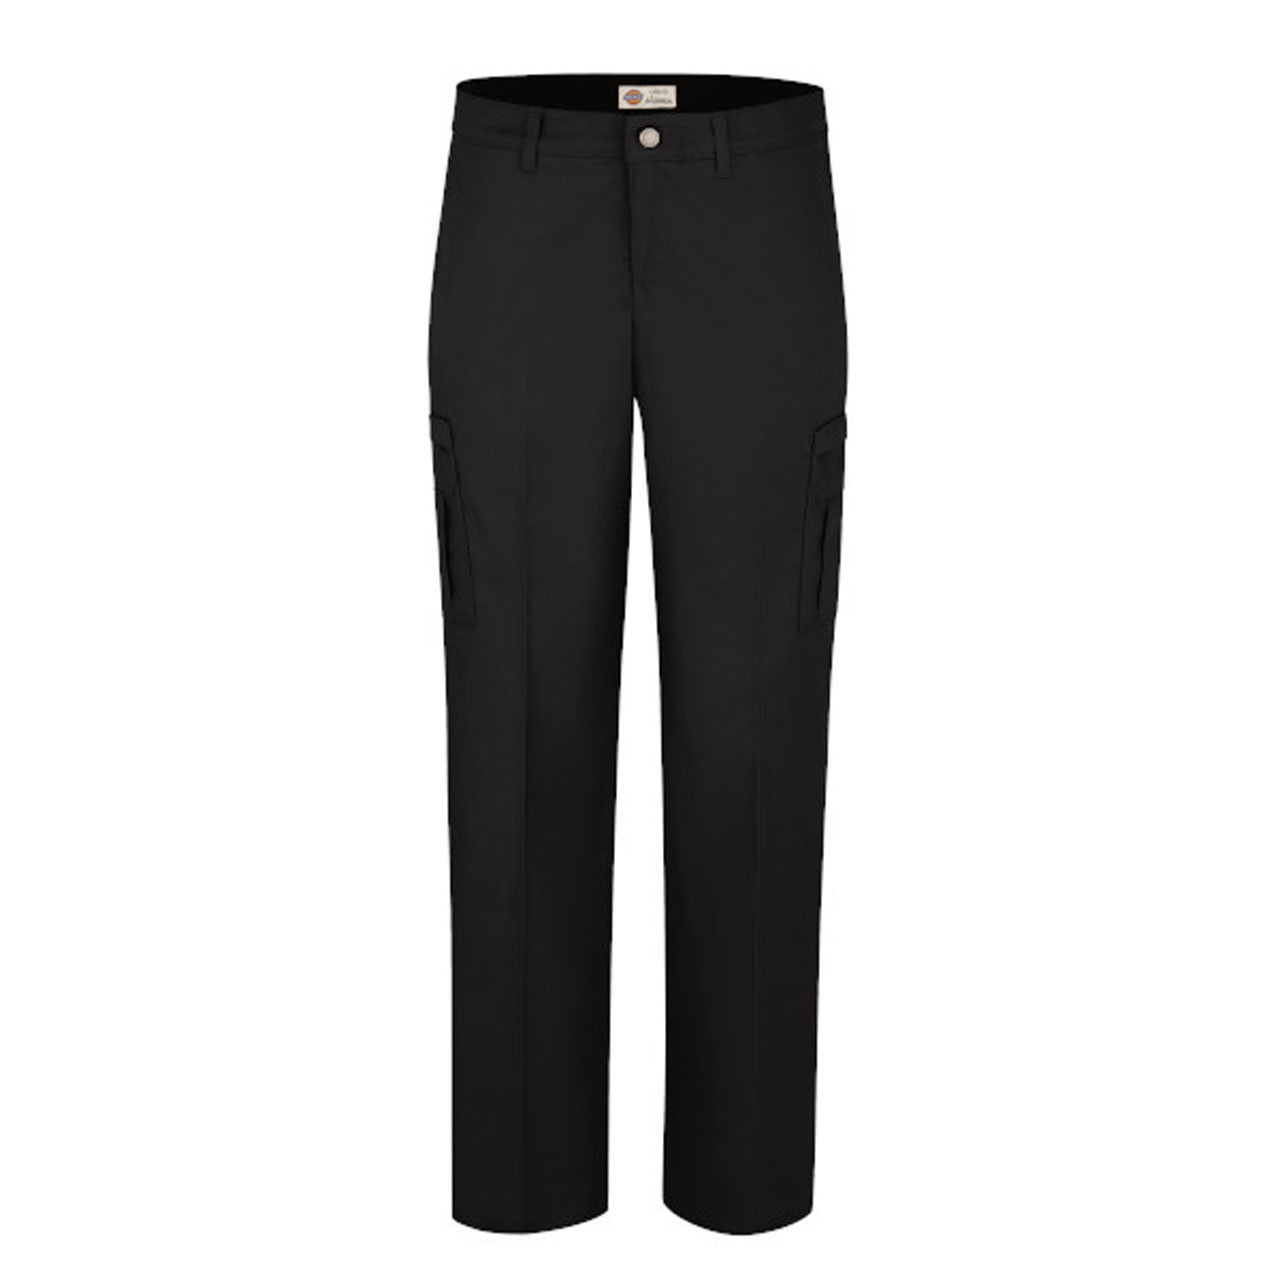 What type of closure do black dickies pants womens have?